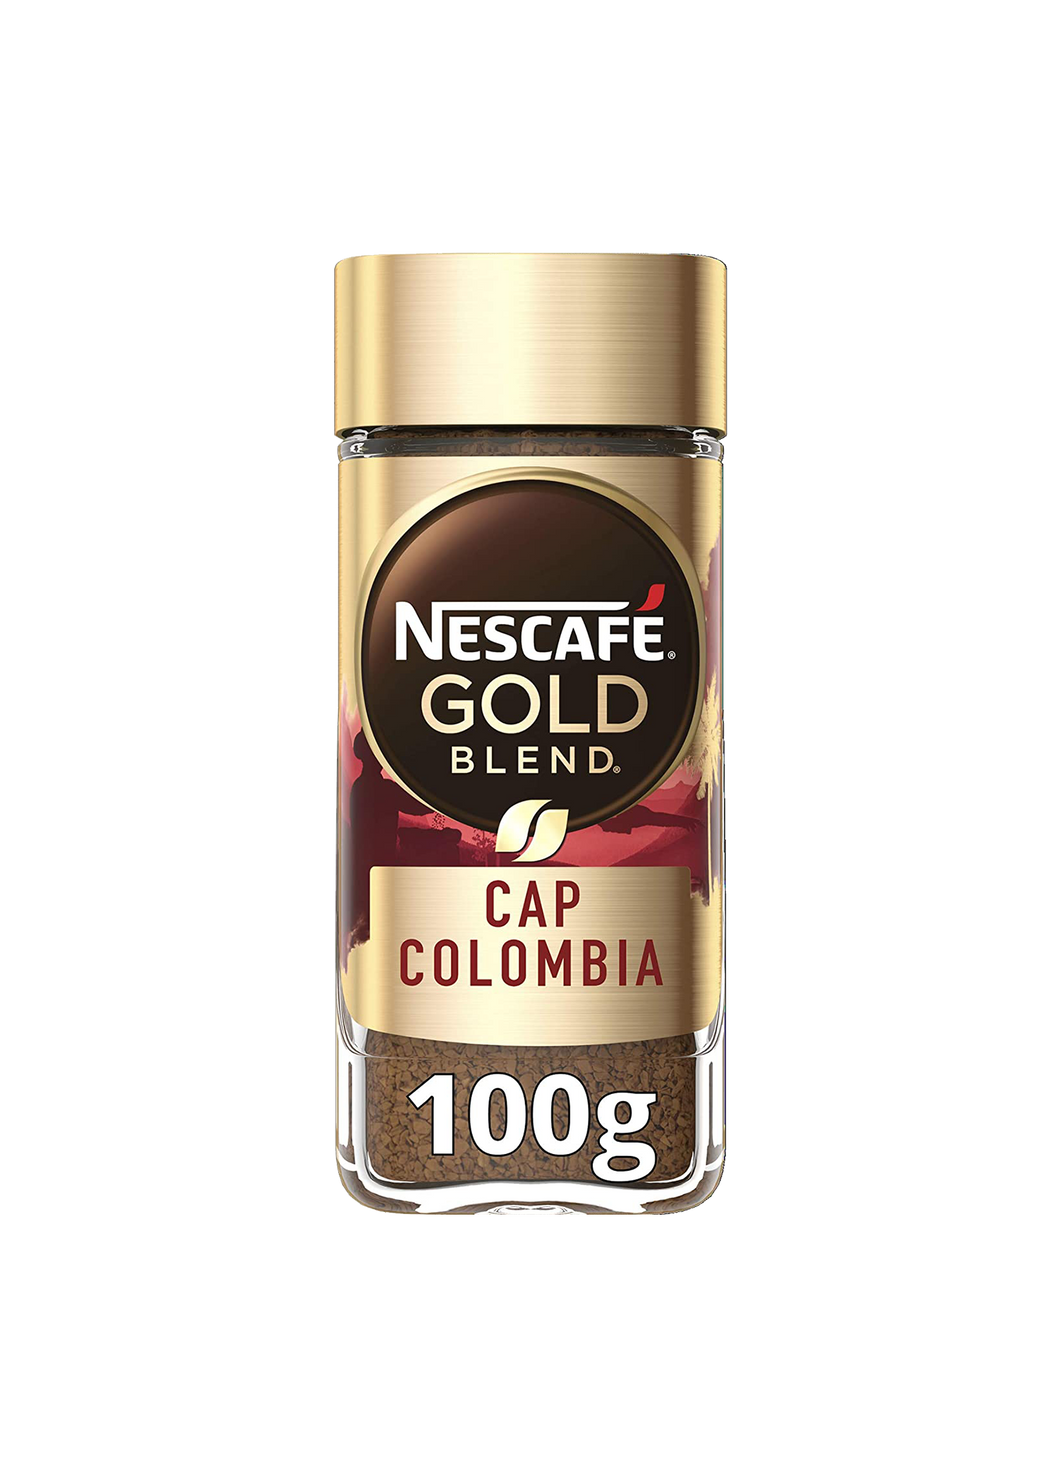 Nescafe Gold Blend Cap Colombia Coffee 100g